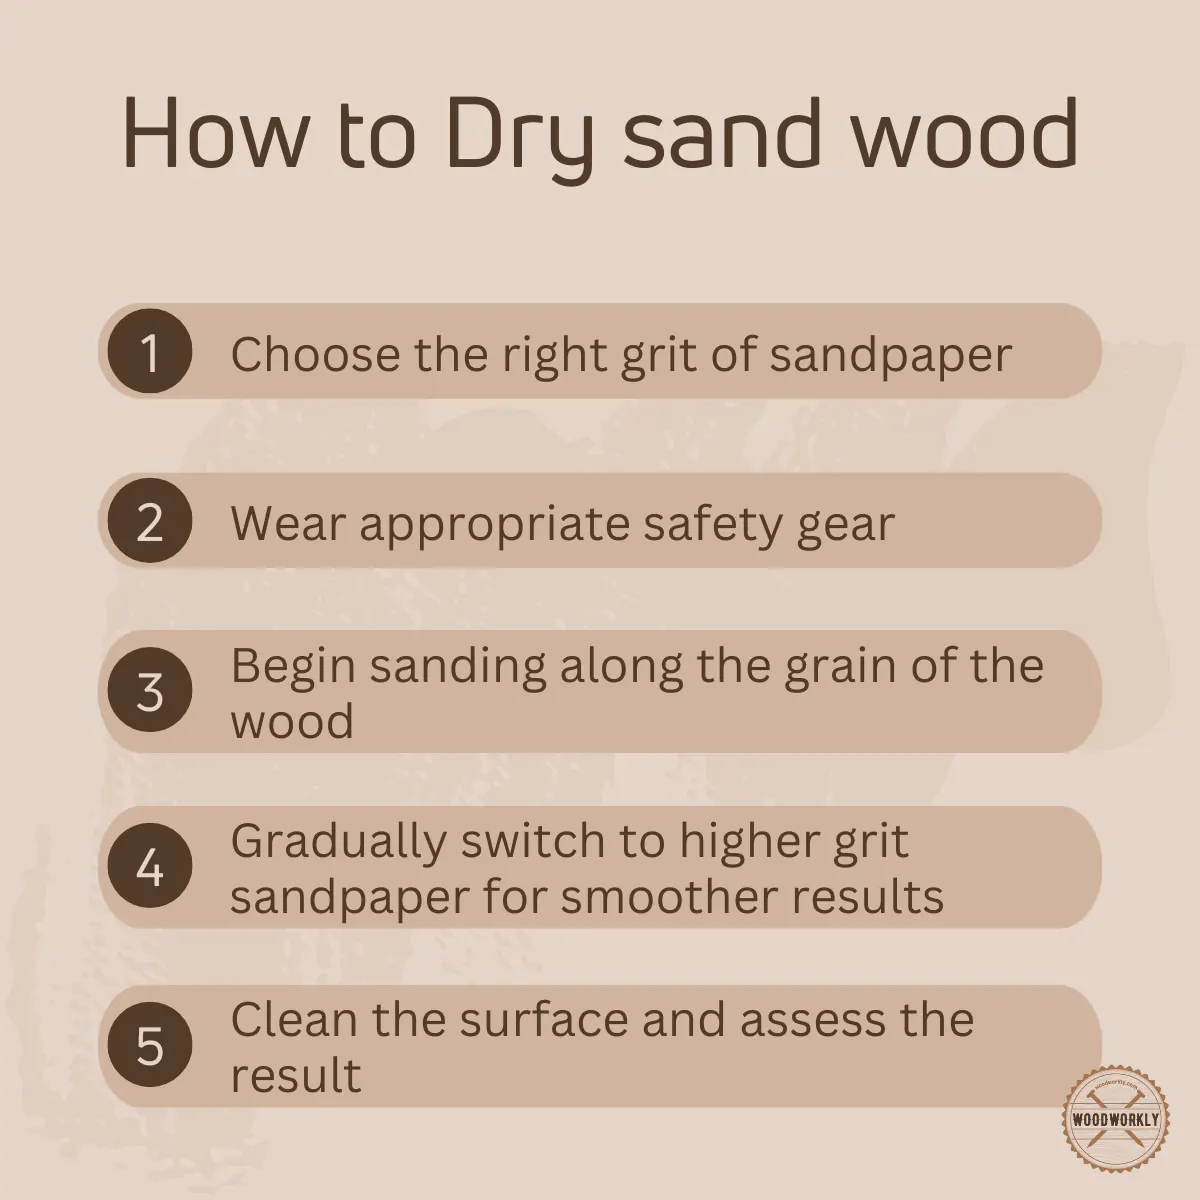 How to Dry sand wood